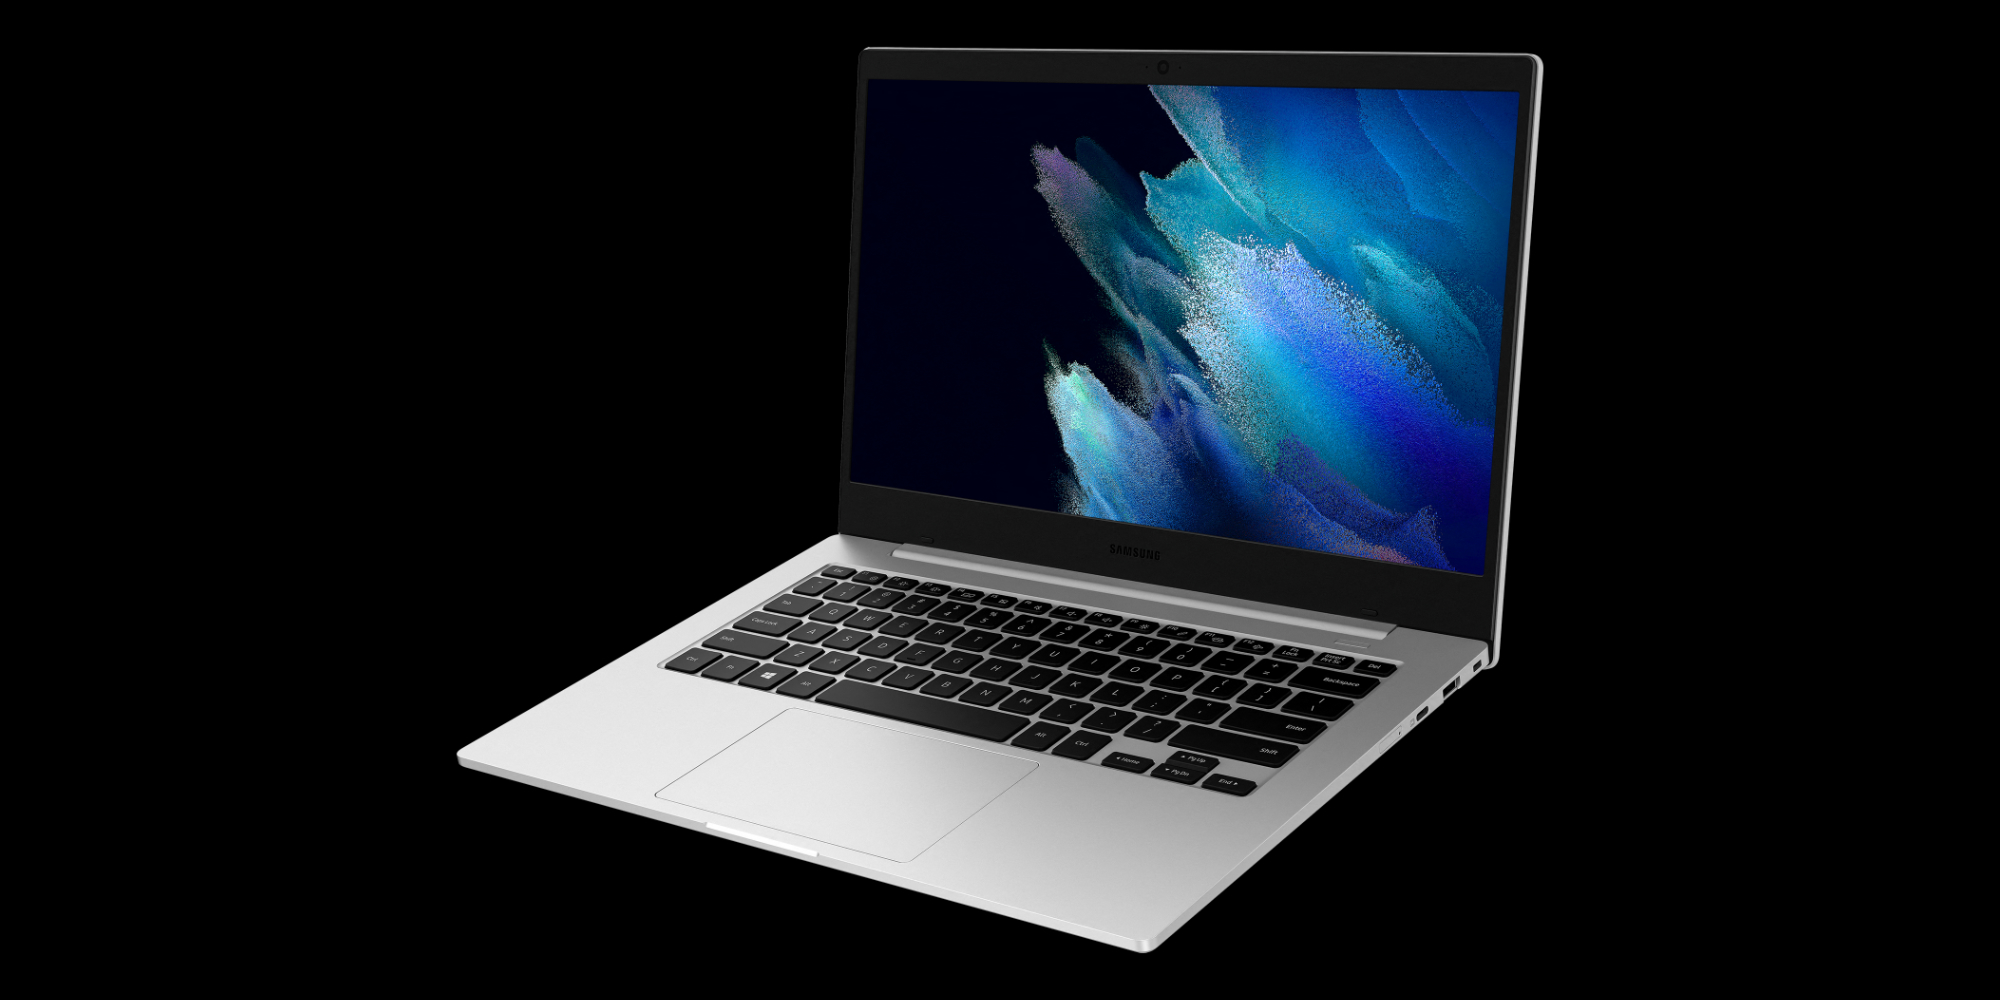 Samsung's allnew Galaxy Book Go sees first discount to 320